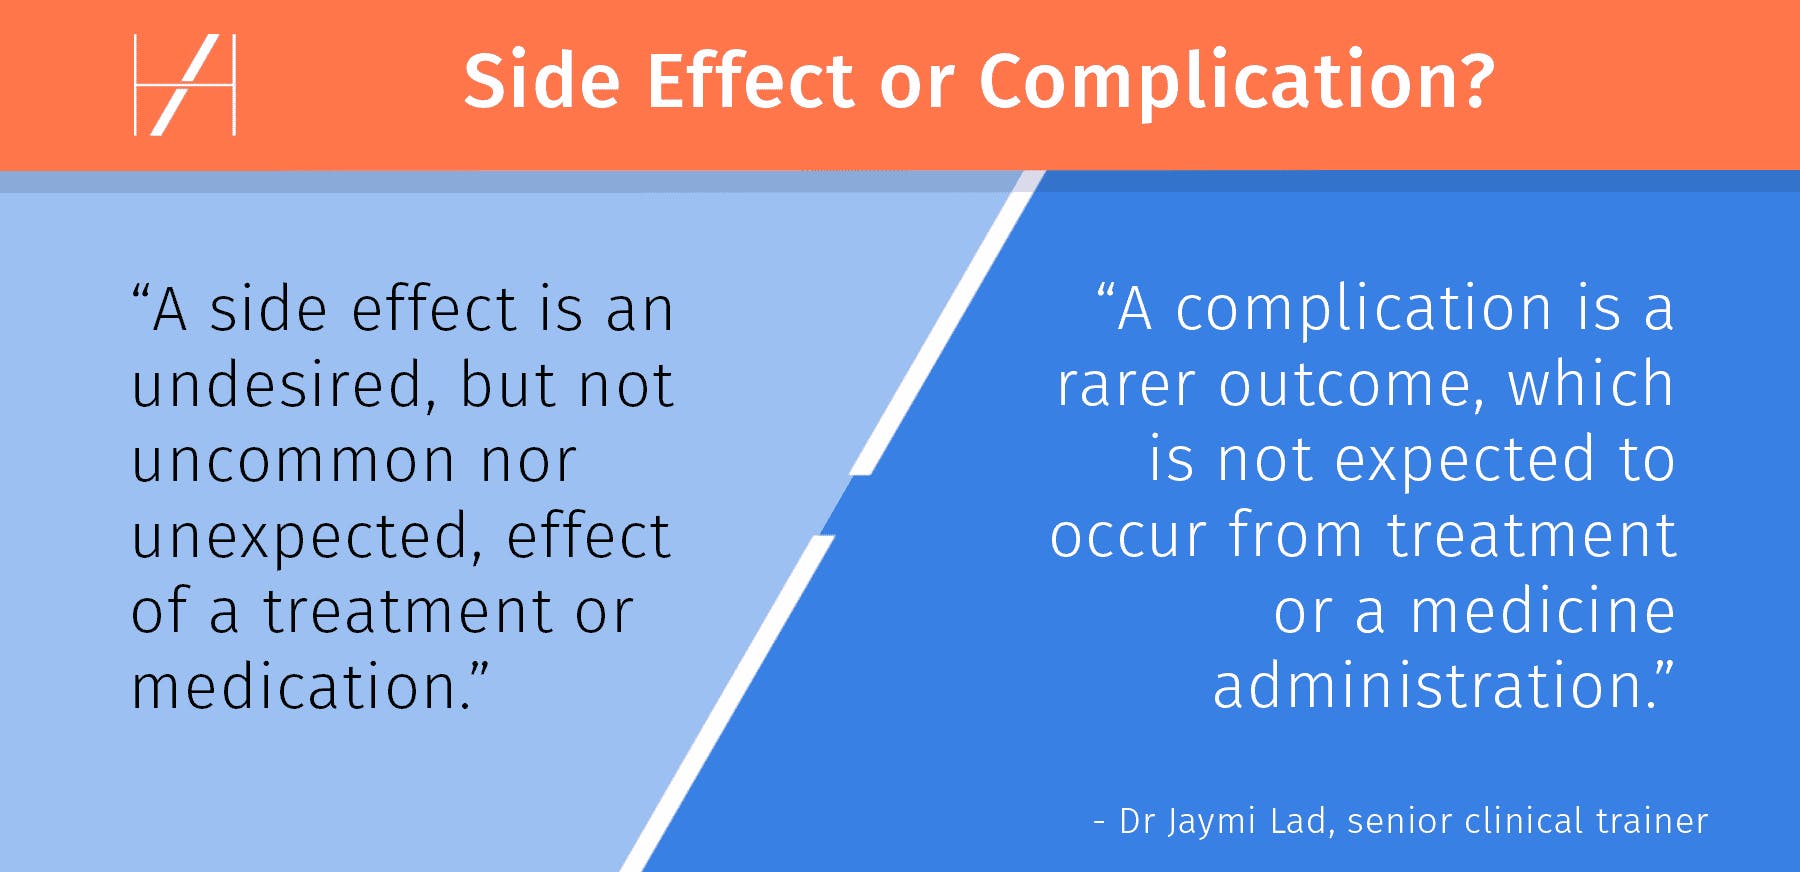 Whats the difference between side effects and complications